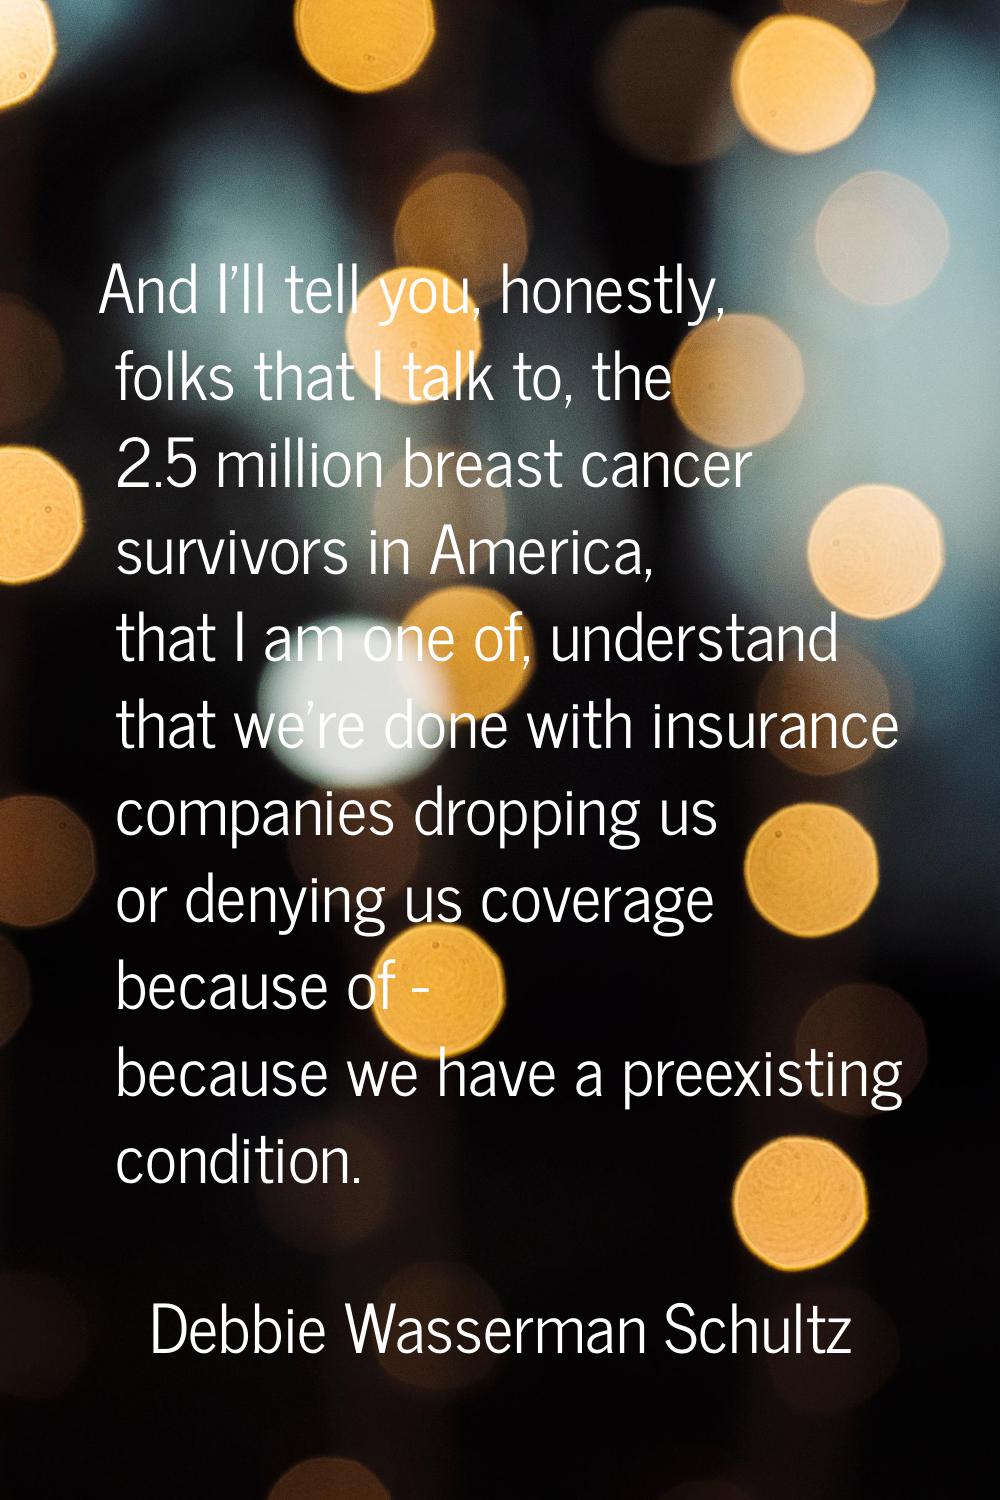 And I'll tell you, honestly, folks that I talk to, the 2.5 million breast cancer survivors in Ameri